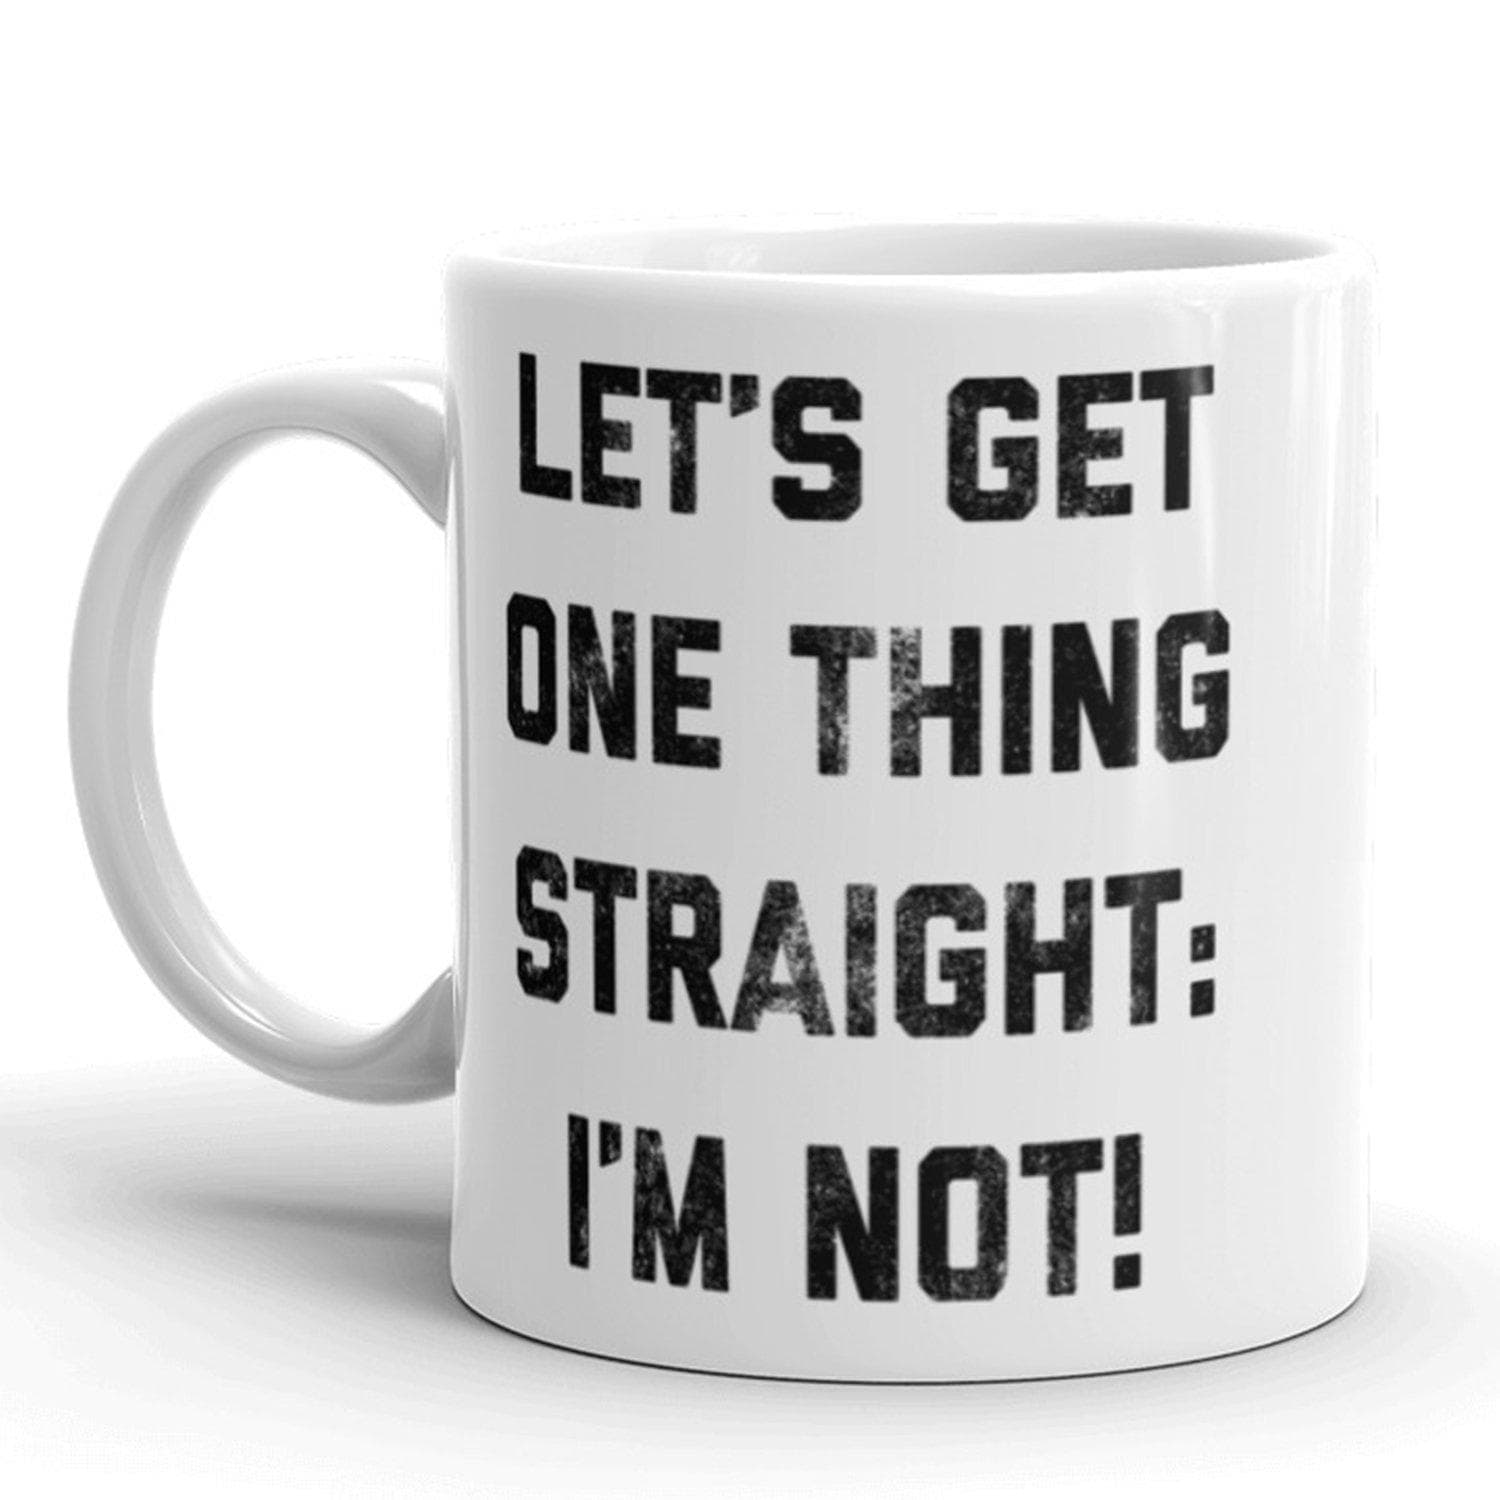 Let's Get One Thing Straight. I'm Not Mug - Crazy Dog T-Shirts